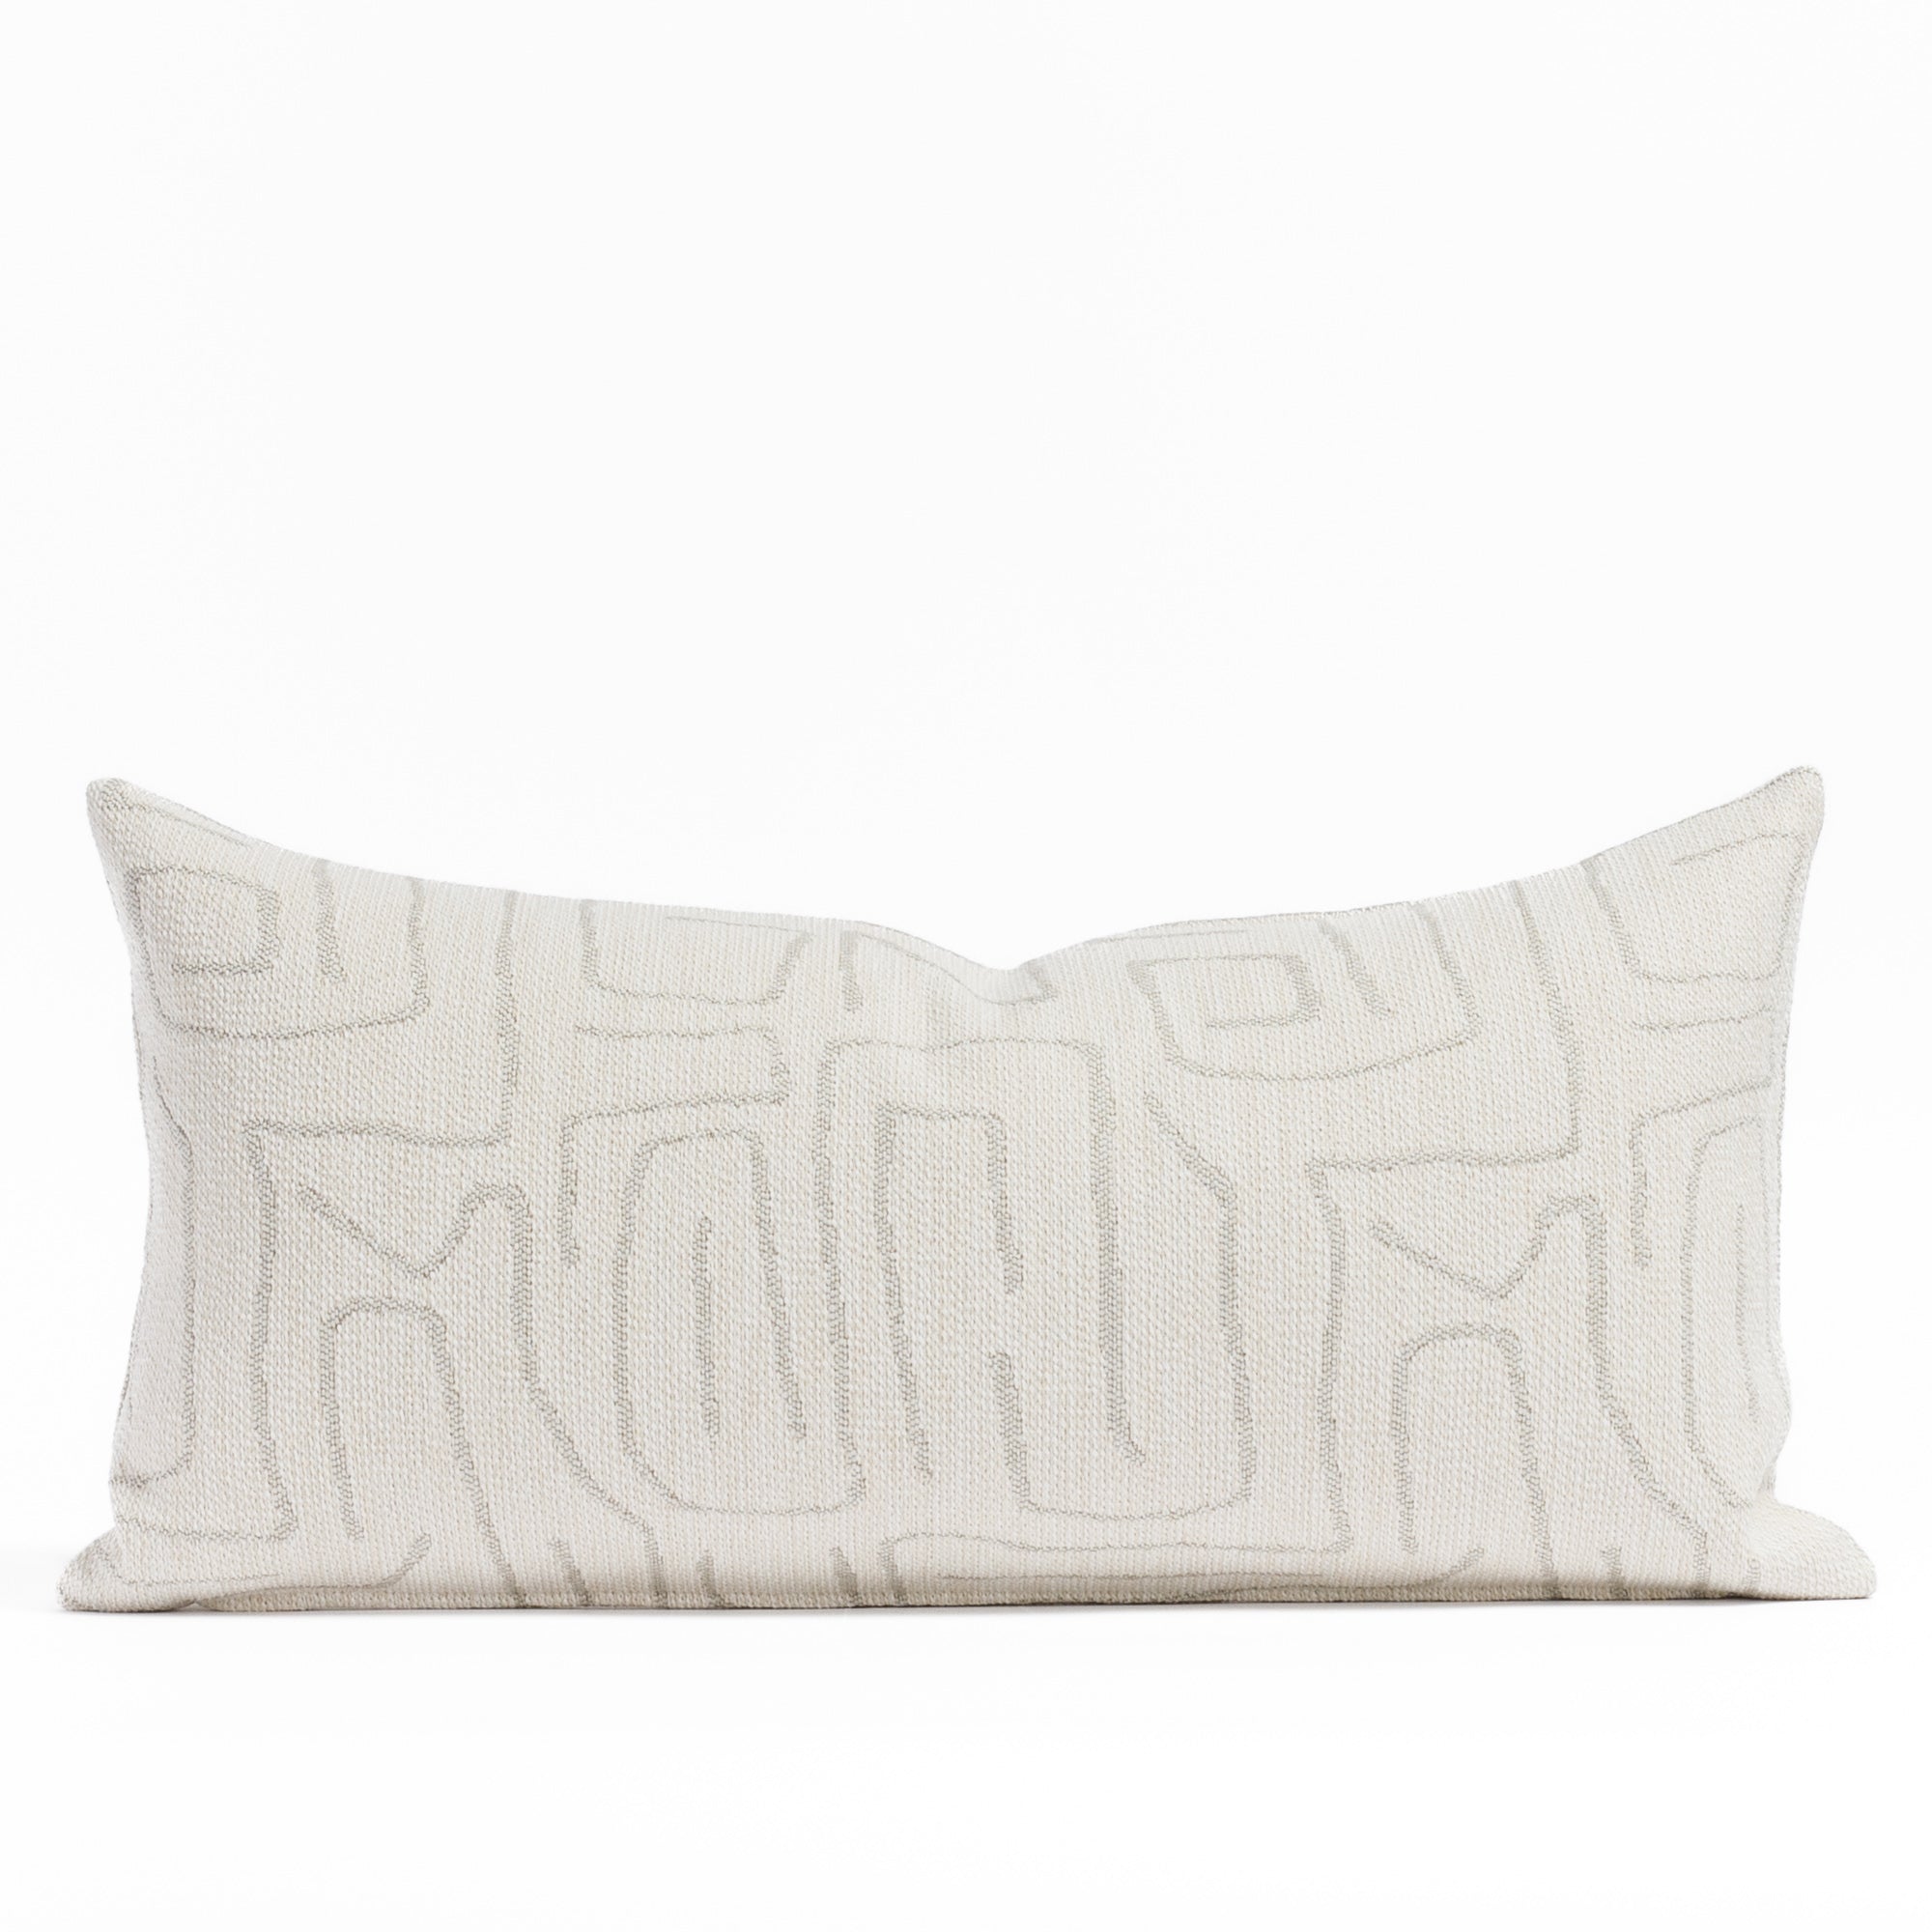 Trace 12x24 Dove Grey Lumbar Pillow, a cream and grey abstract line patern pillow form Tonic Living